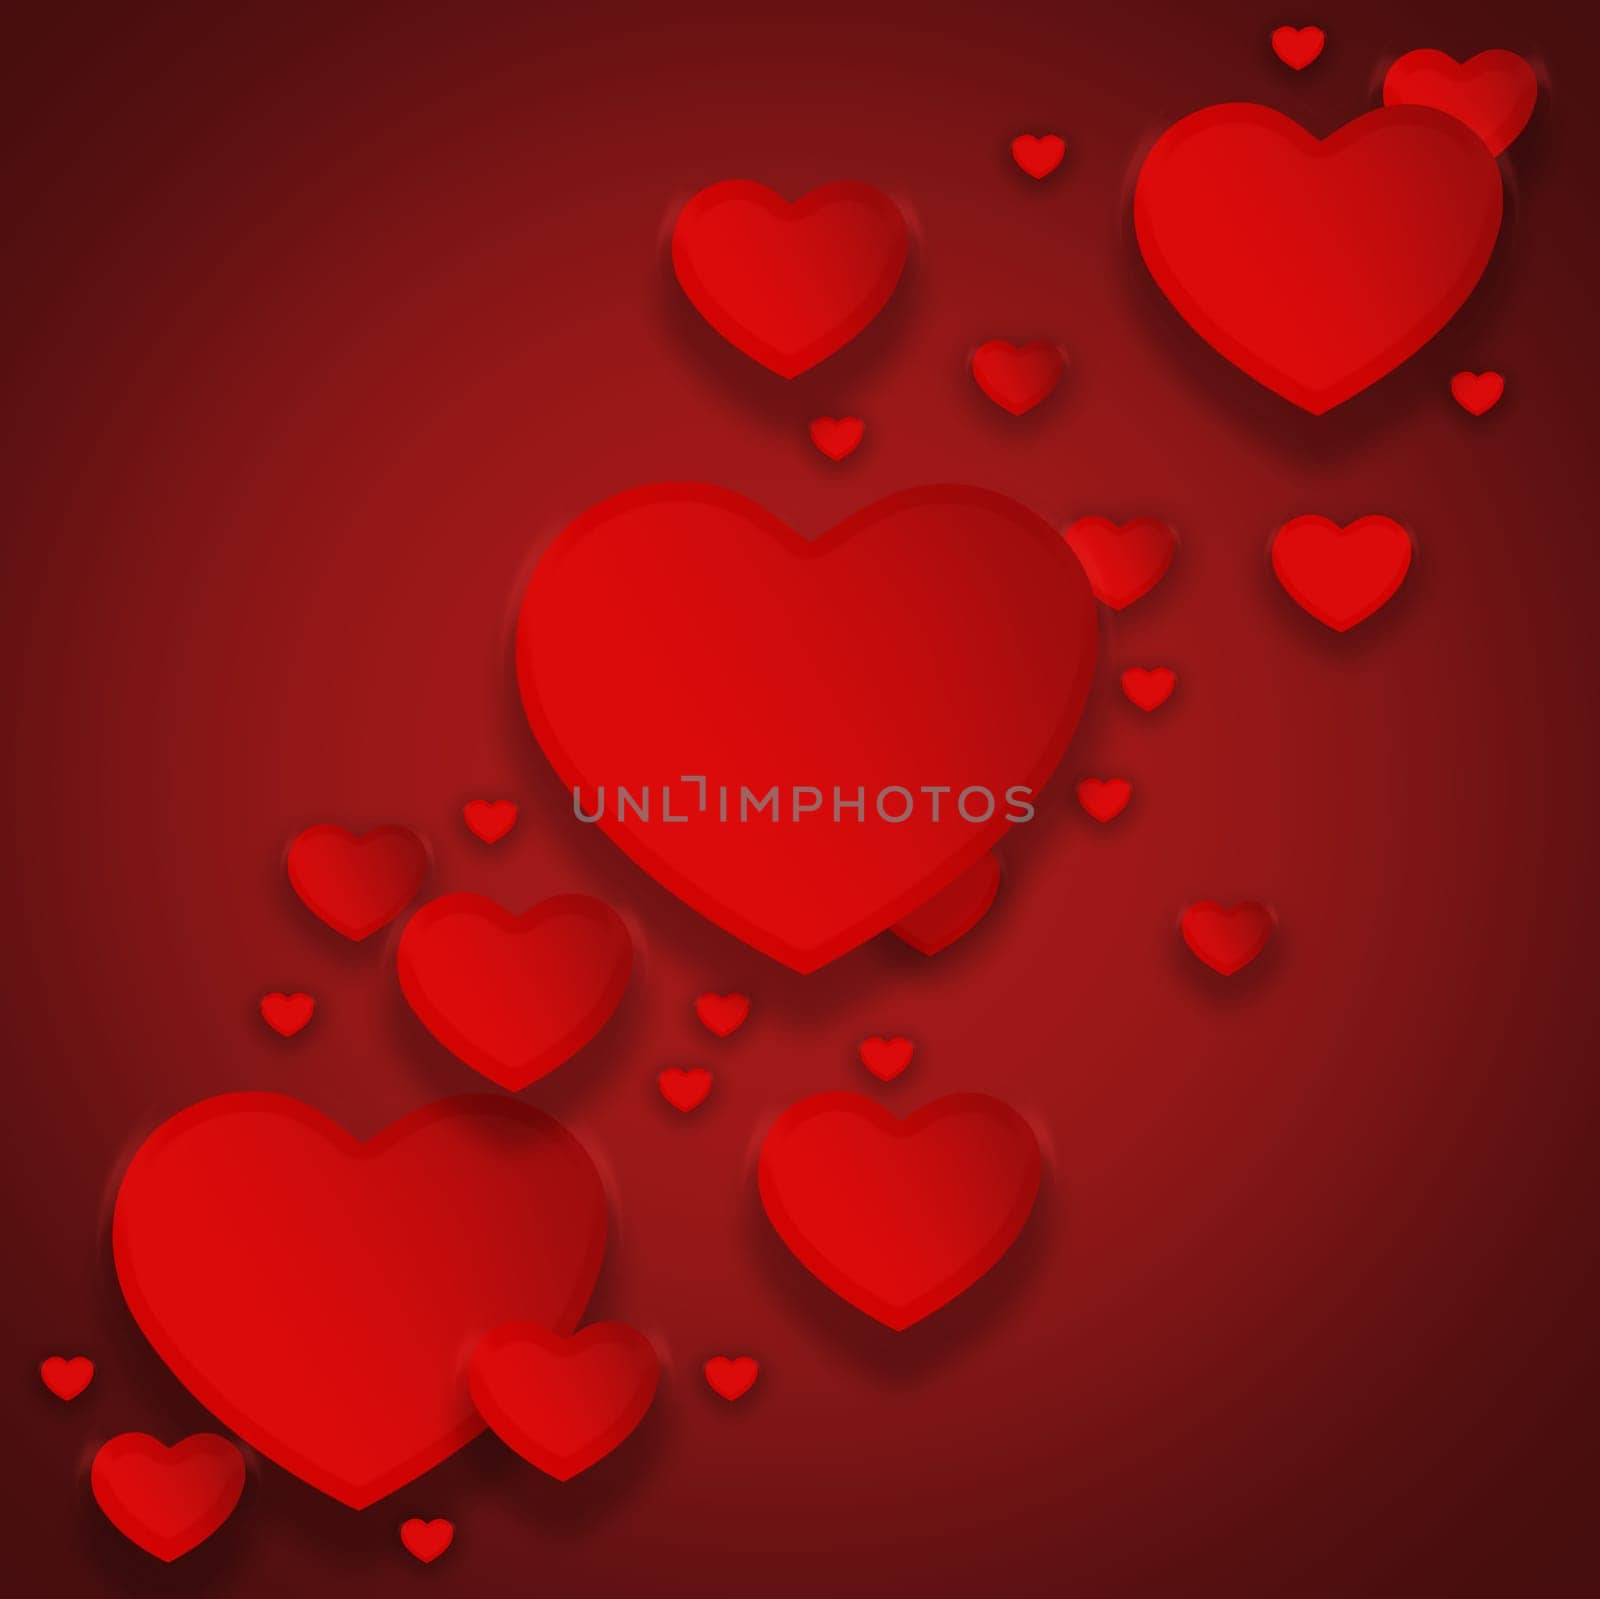 Illustration, heart and creative collection for love or devotion, care and red background. Shape, romance and kindness for valentines day celebration, icon and abstract art for support or peace.